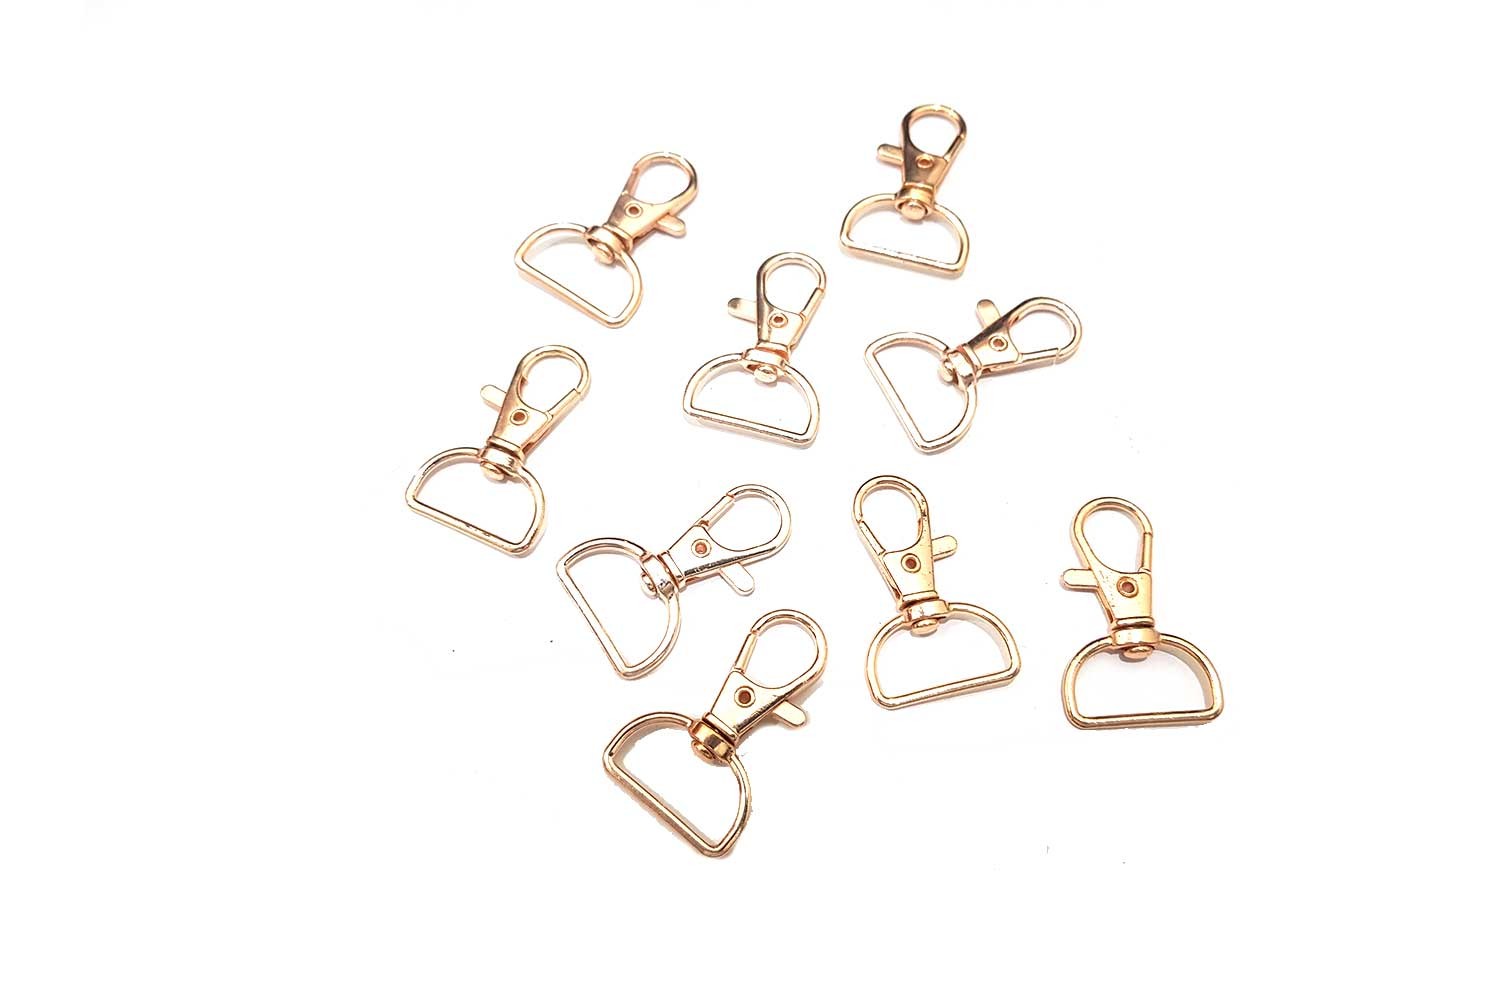 Solid cast closed D rings - metal D-Rings for bags collars crafts 10 to  75mm | eBay